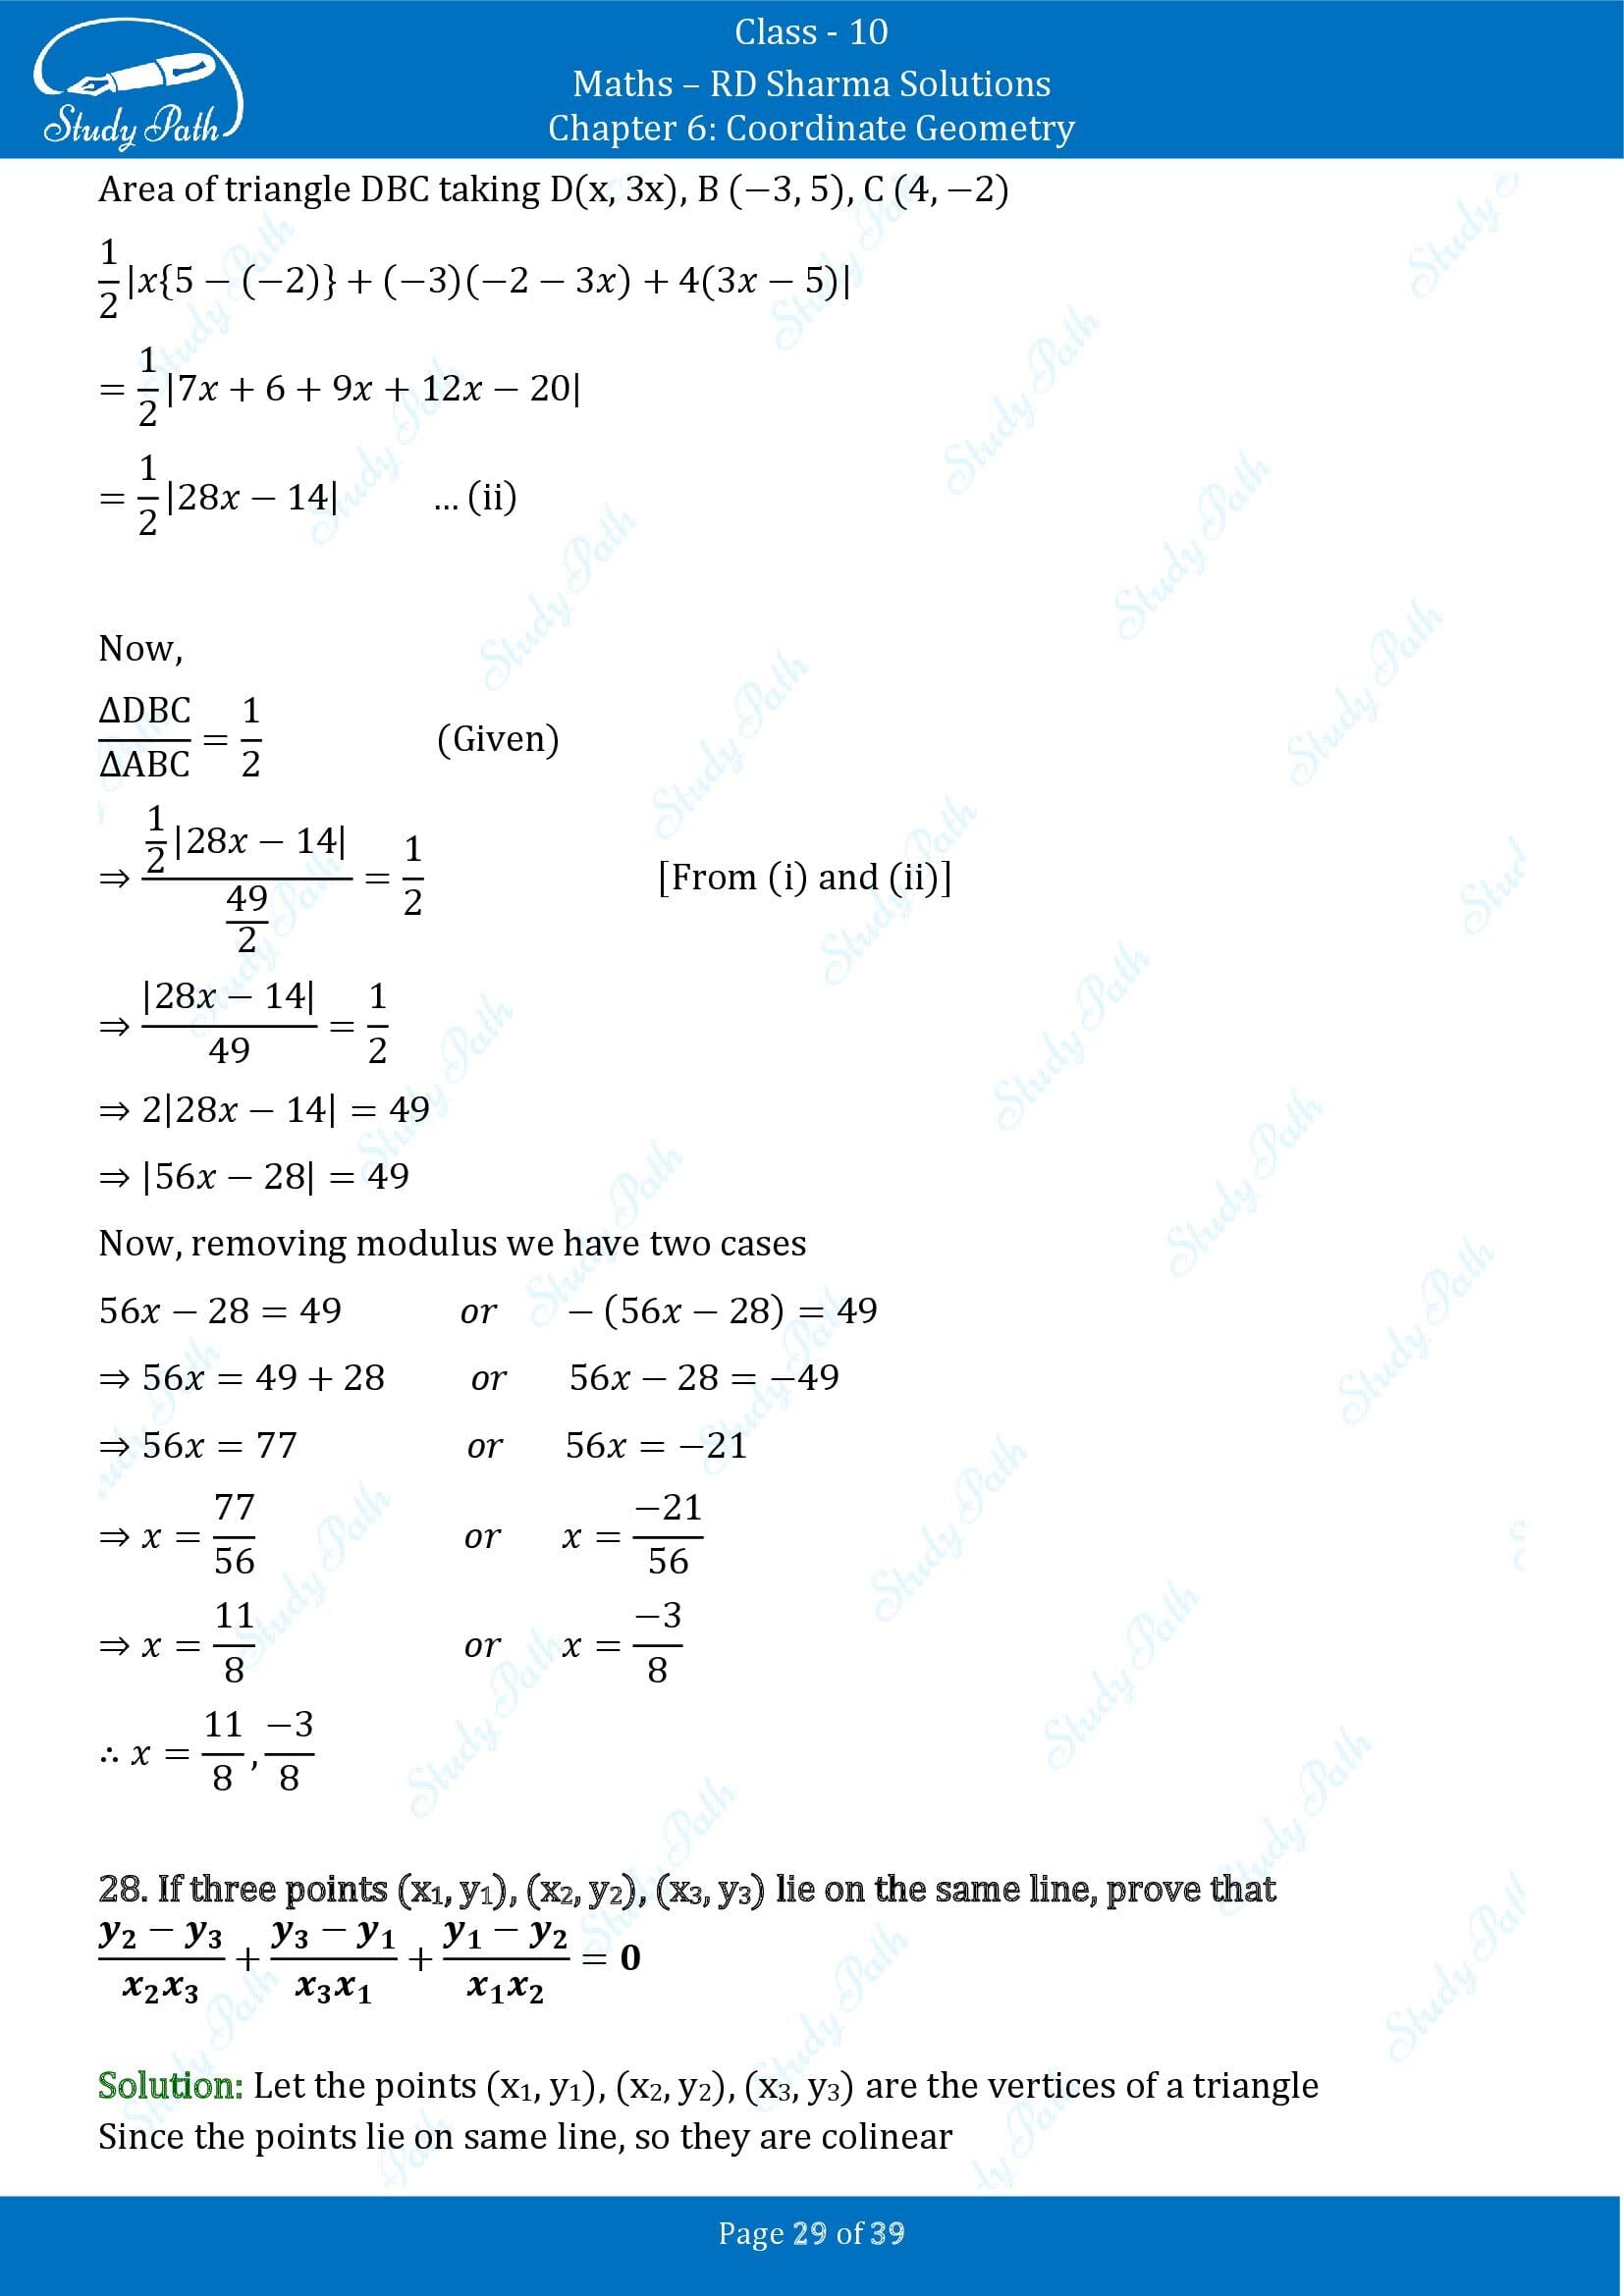 RD Sharma Solutions Class 10 Chapter 6 Coordinate Geometry Exercise 6.5 0029